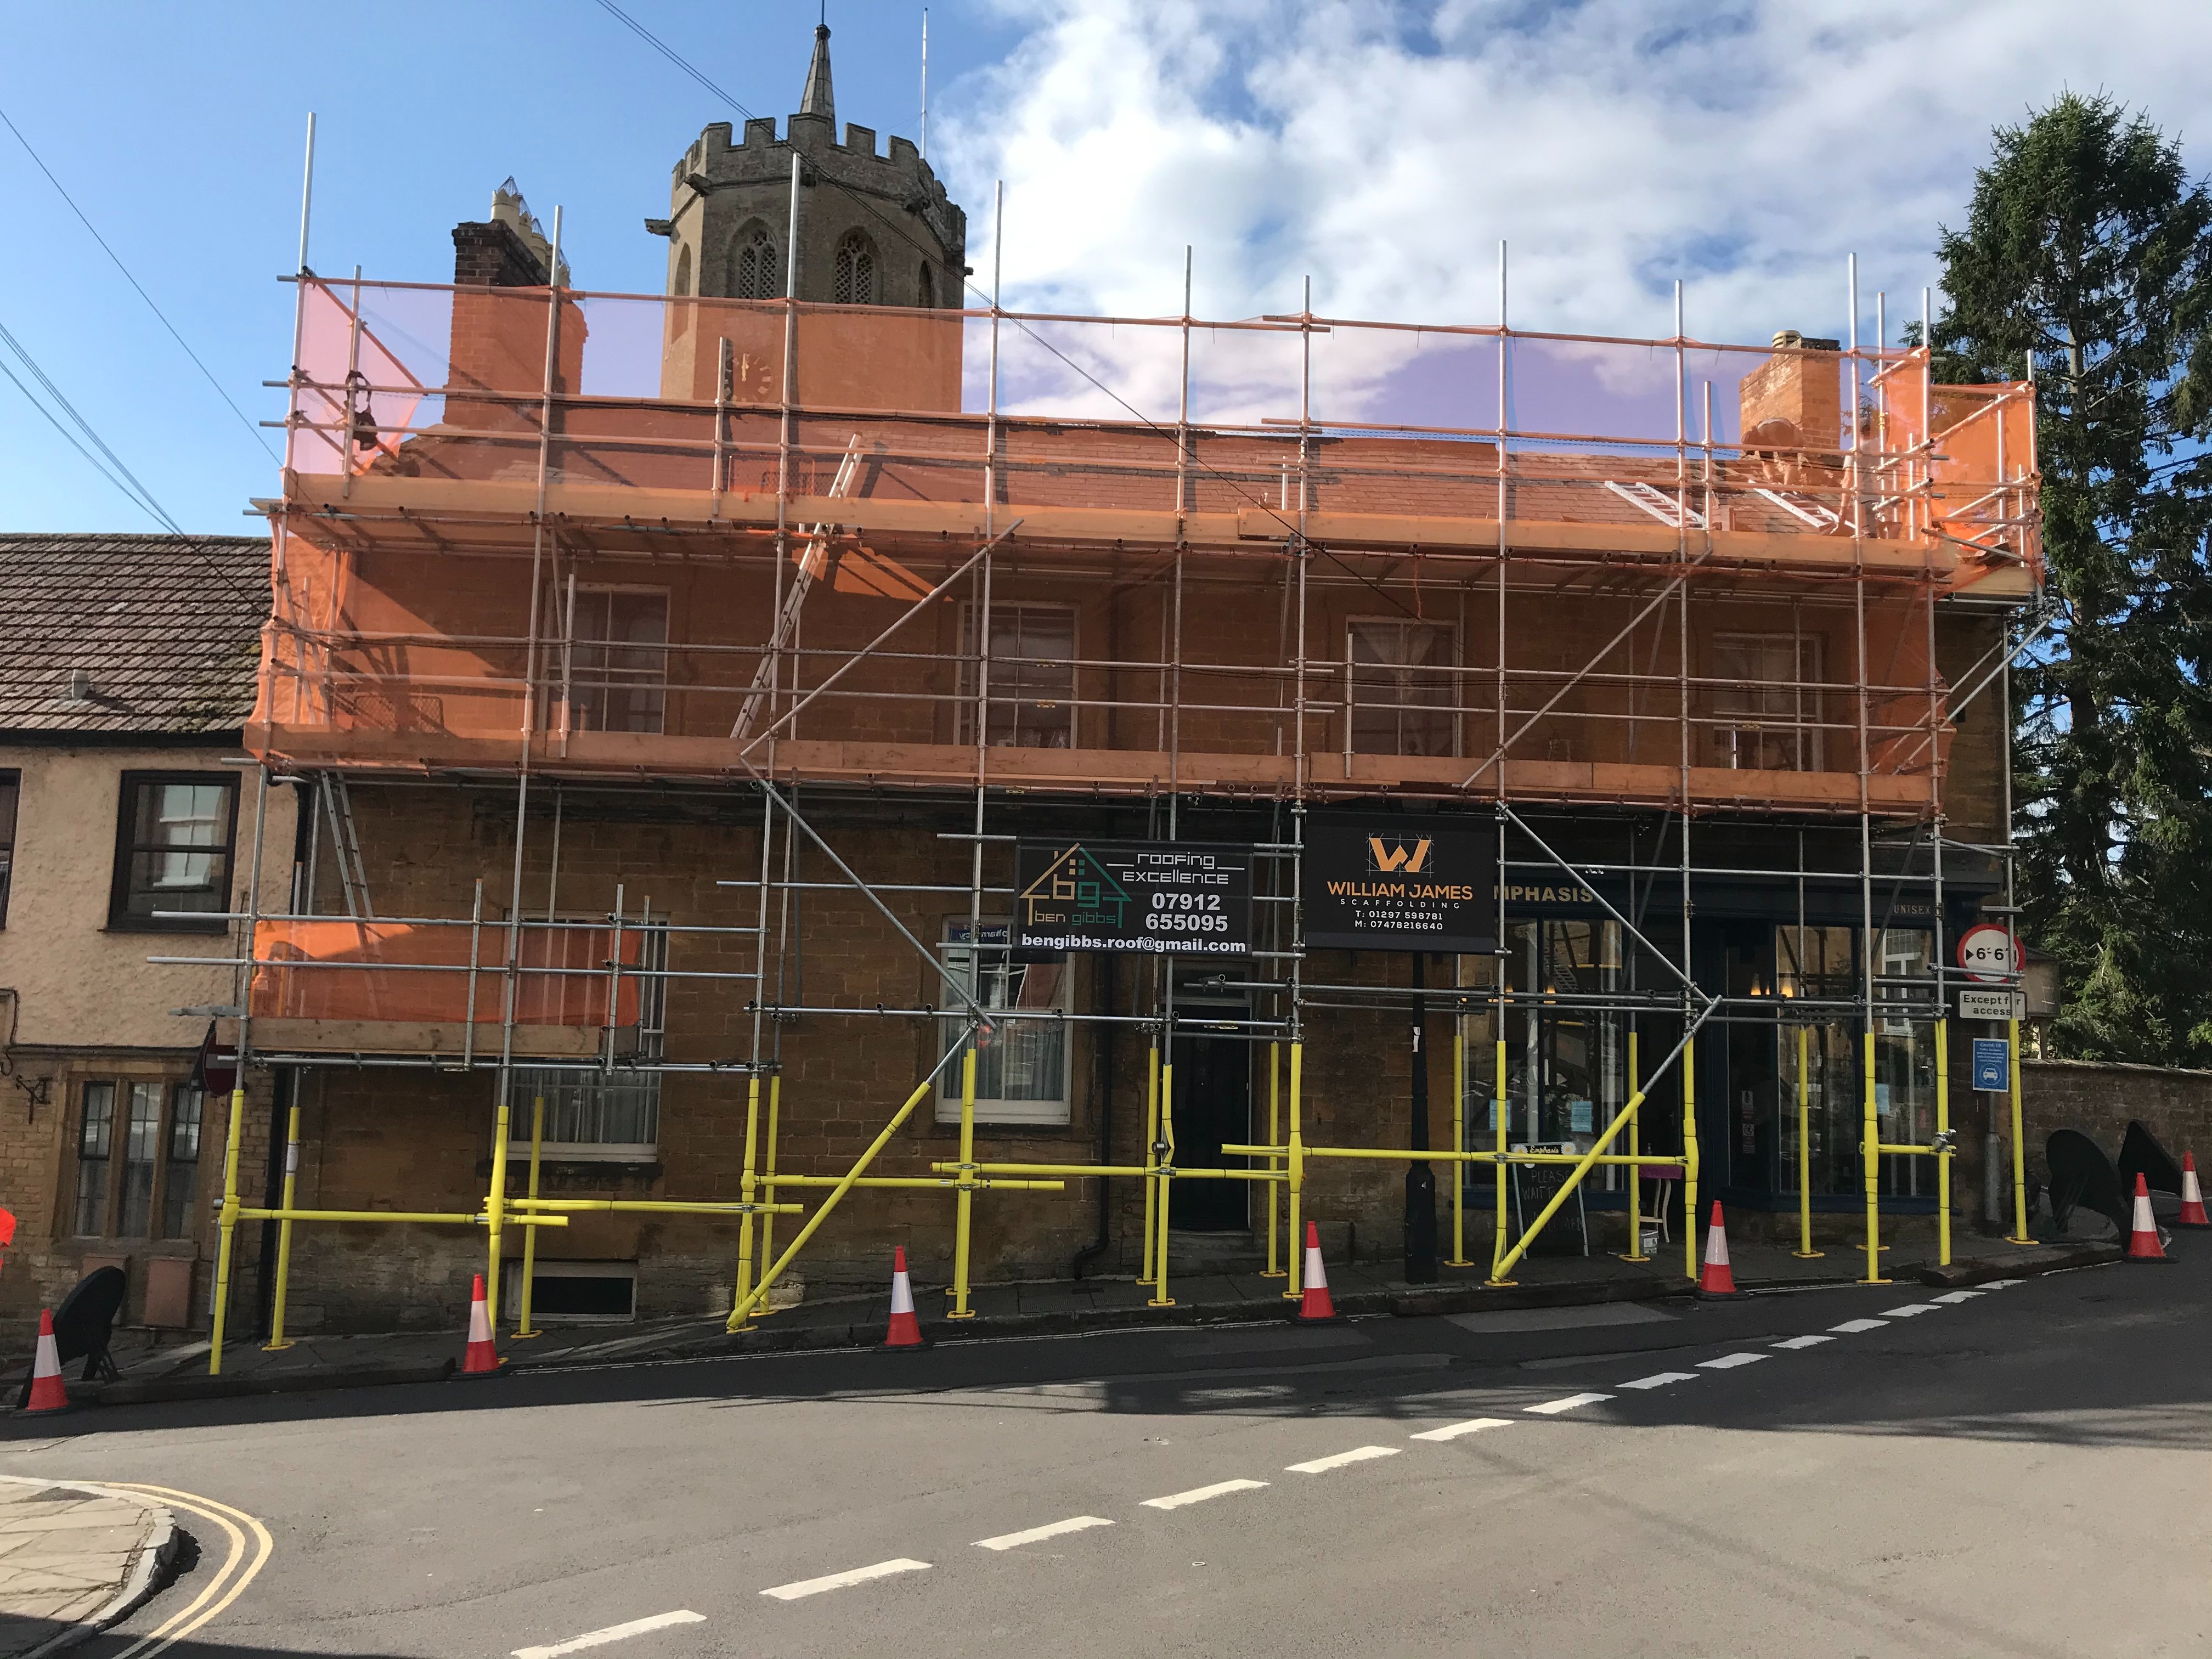 reliable scaffolding in colyton